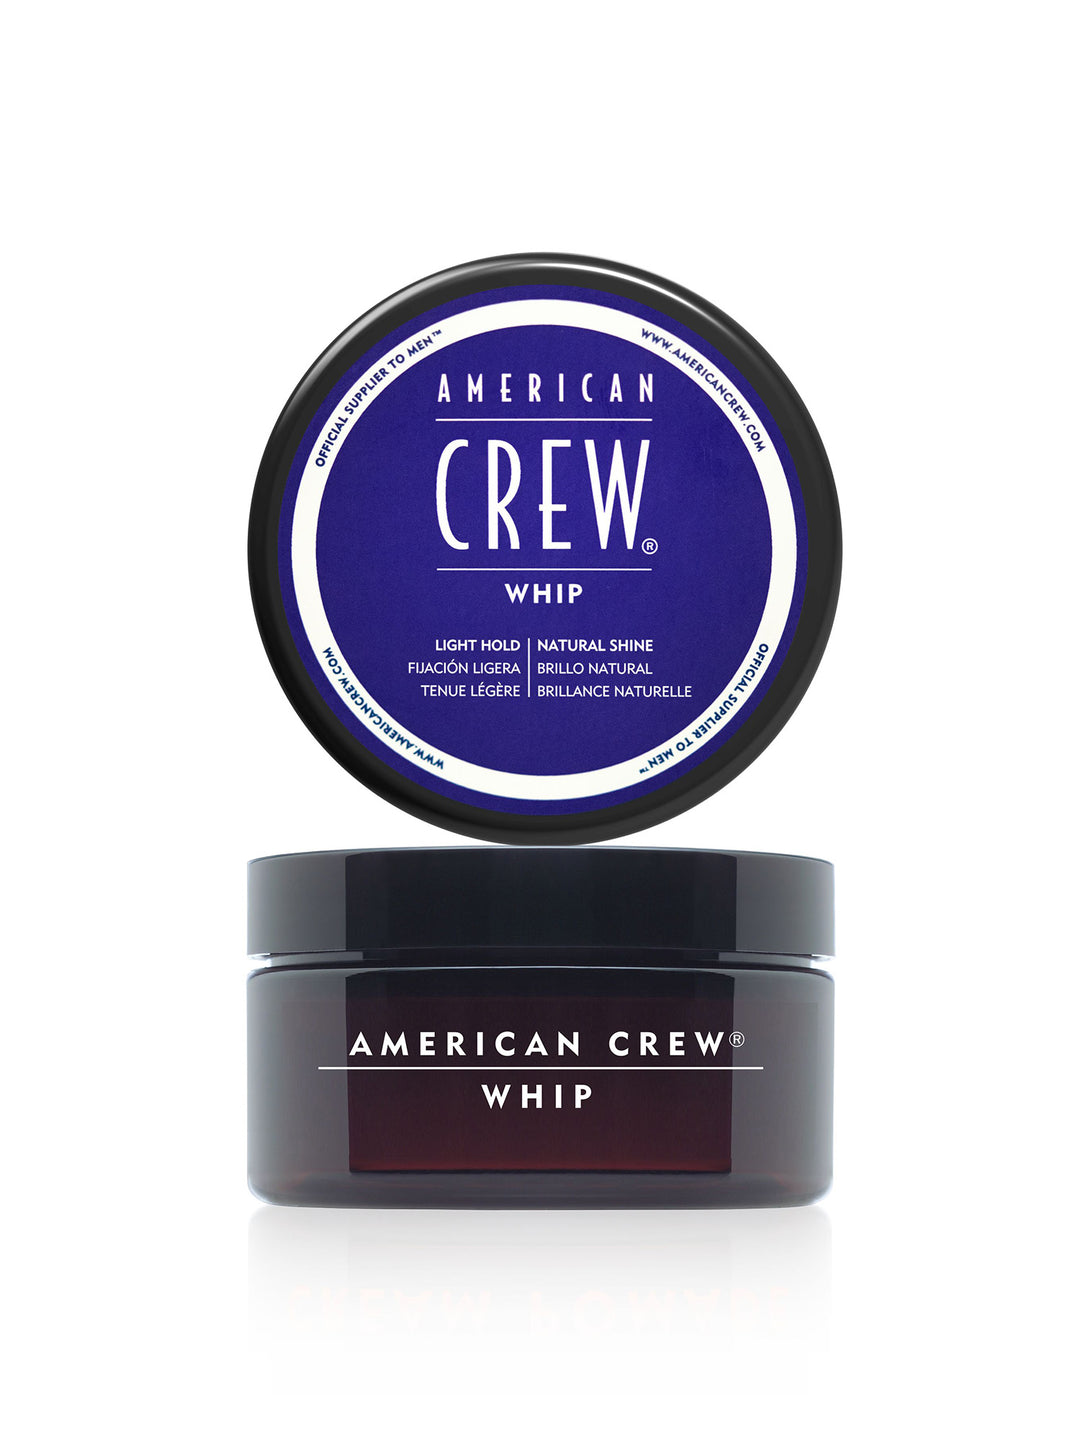 Hair Pomade, Products Crew - Gel, Styling Hair and American Cream